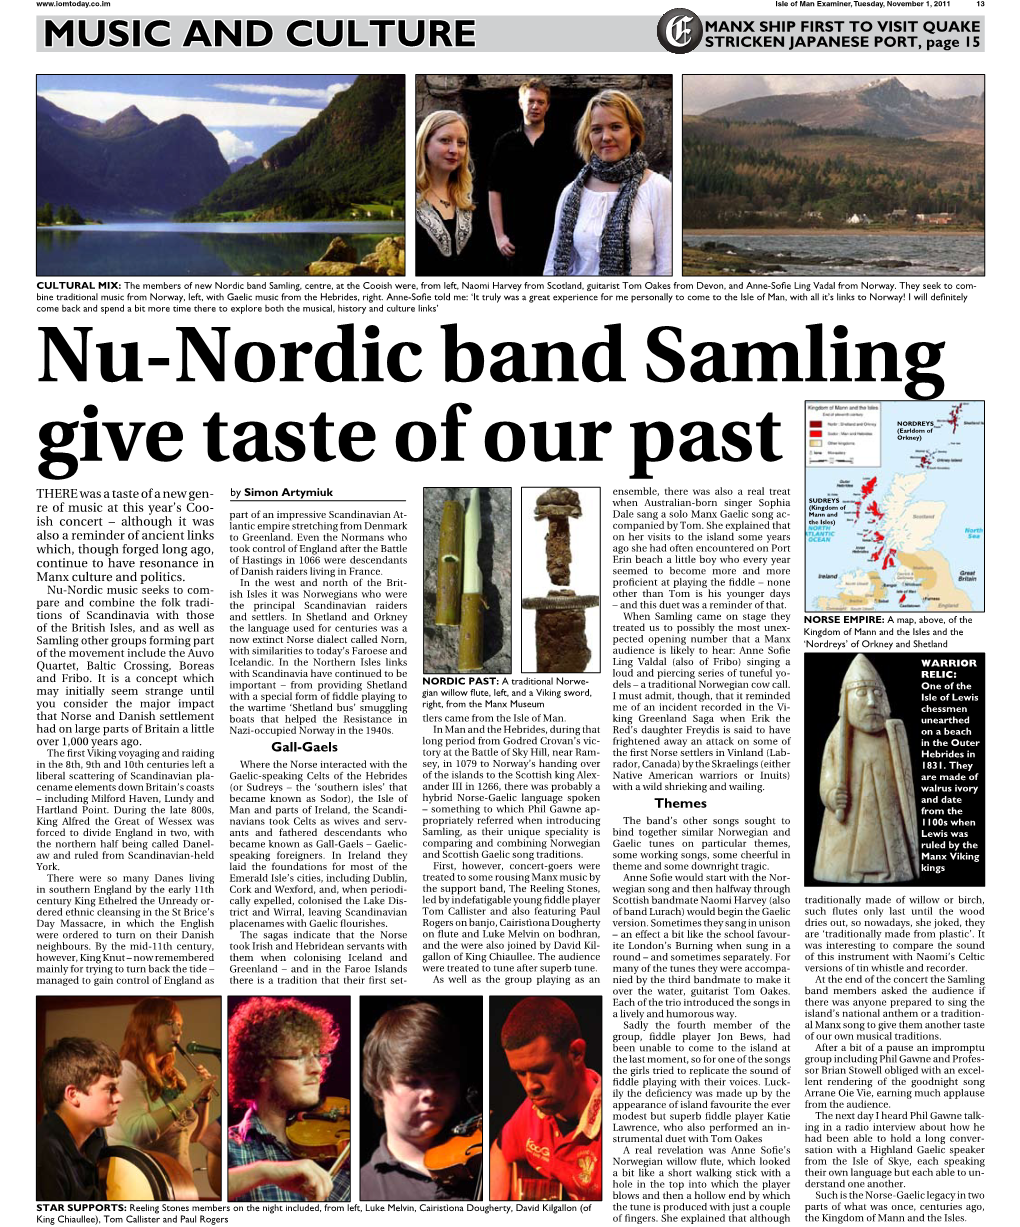 Nu-Nordic Band Samling Give Taste of Our Past